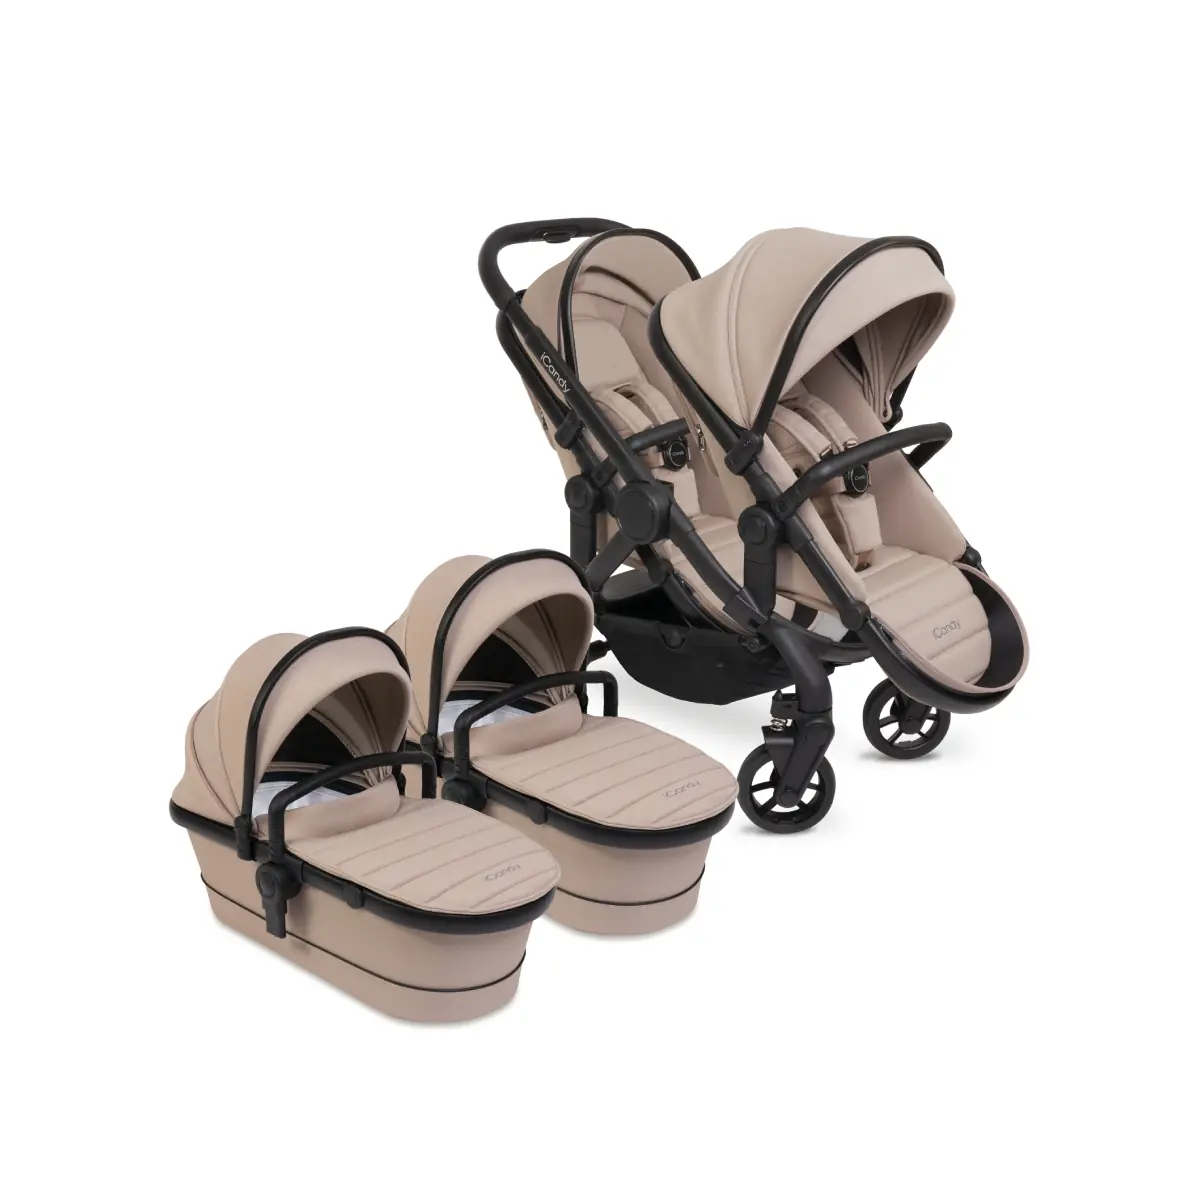 Image of iCandy Peach 7 Twin Pushchair Bundle-Cookie